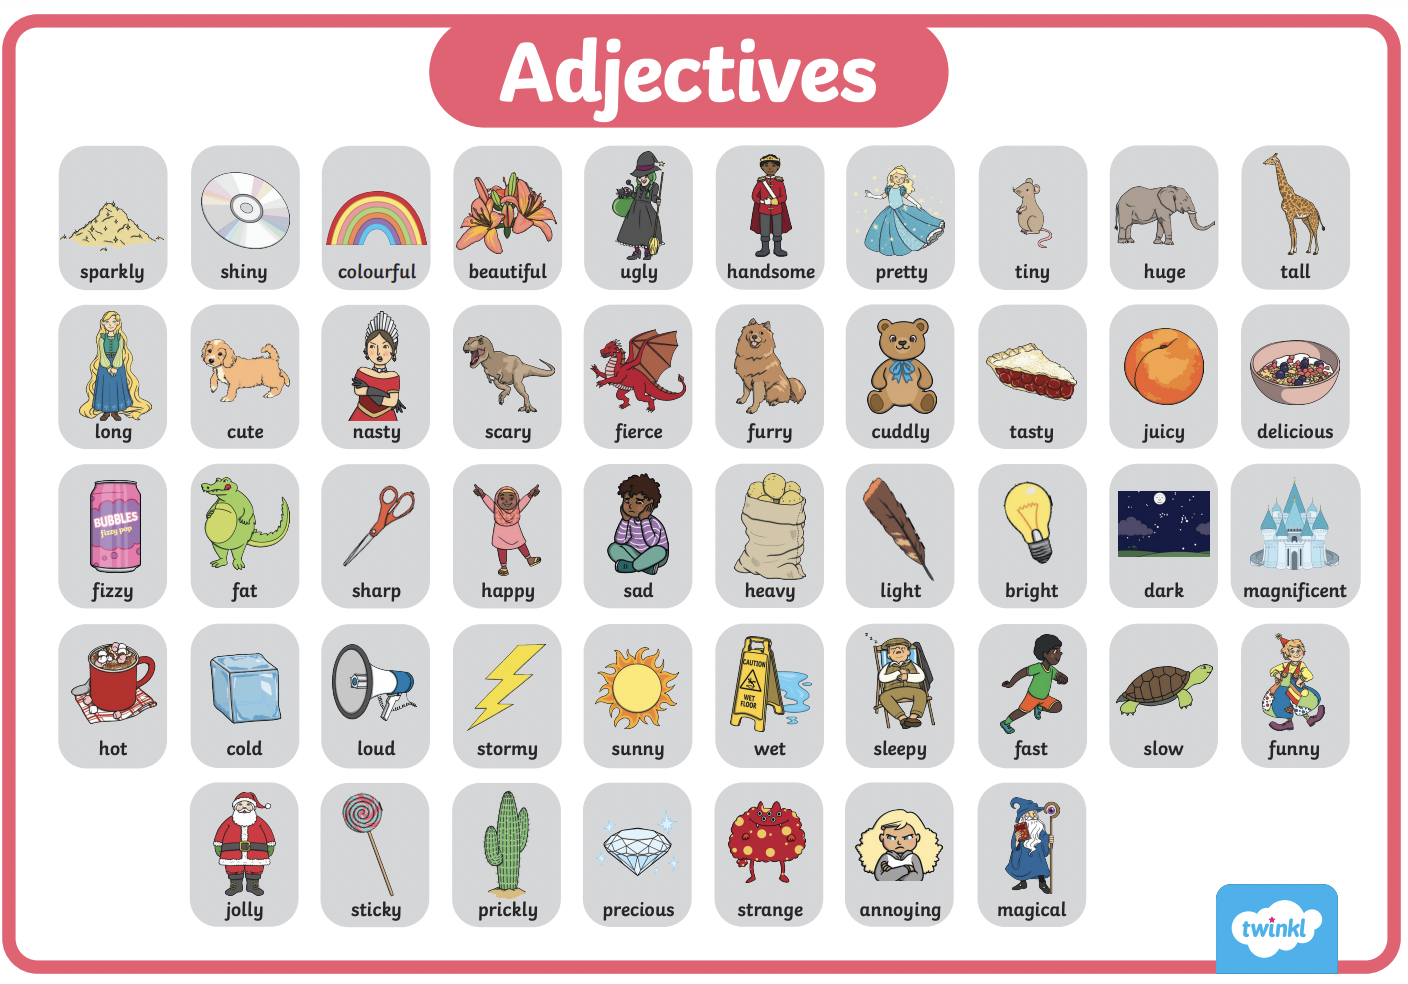 1 find the adjective